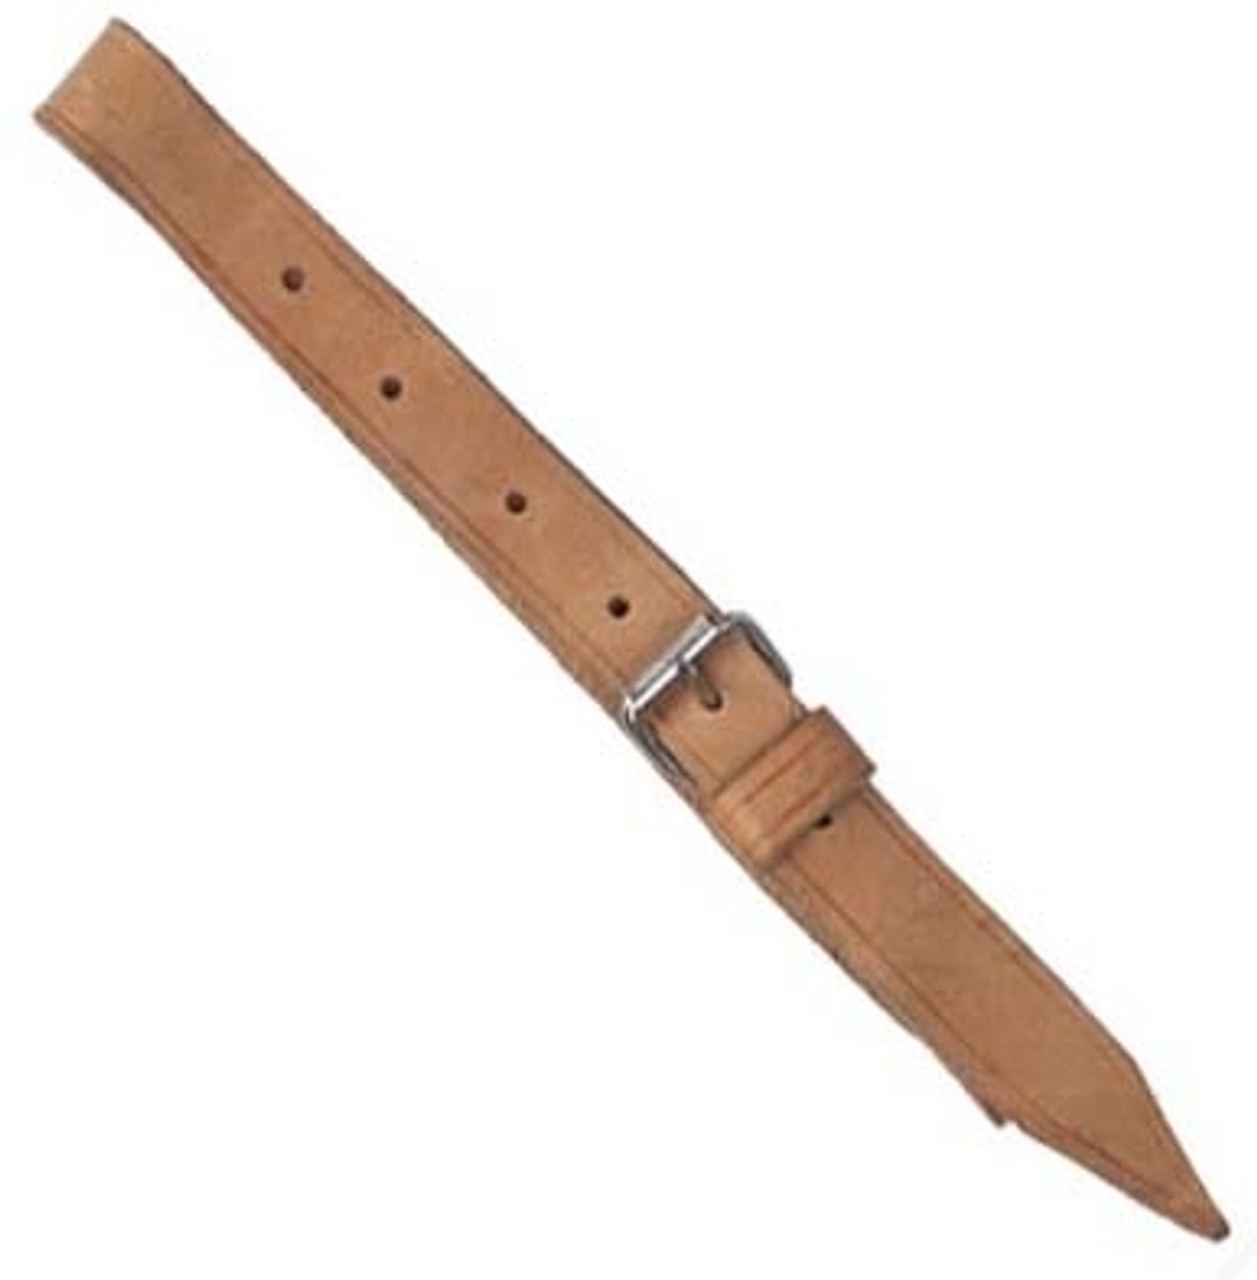 polish Brown Leather 60cm Pack Strap from Hessen Antique